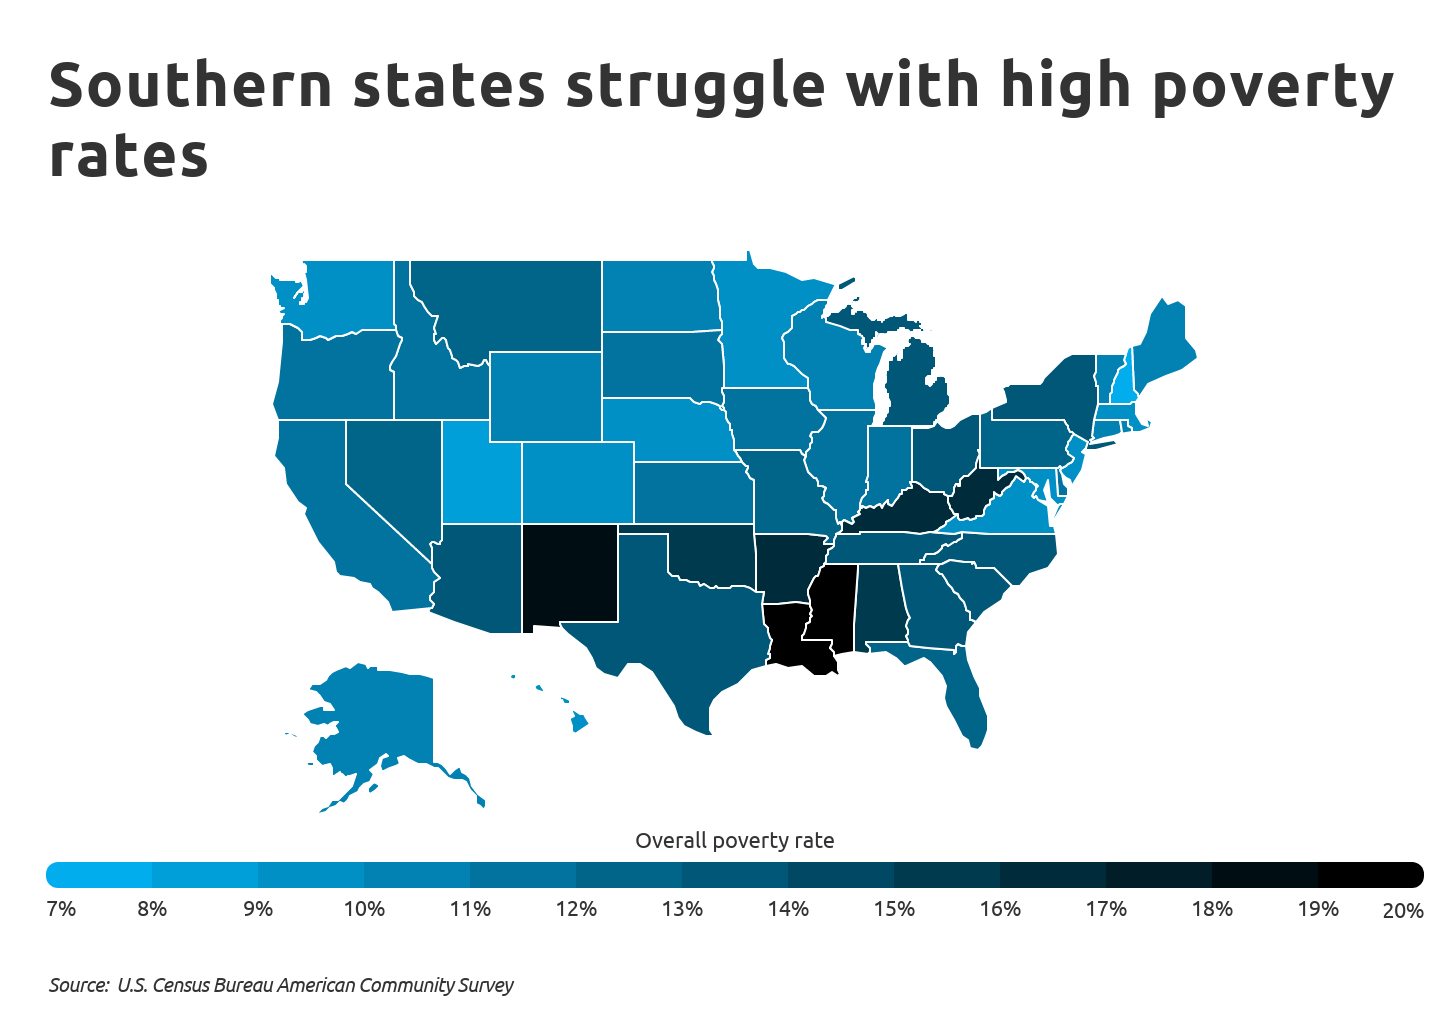 Southern states struggle with high poverty rates